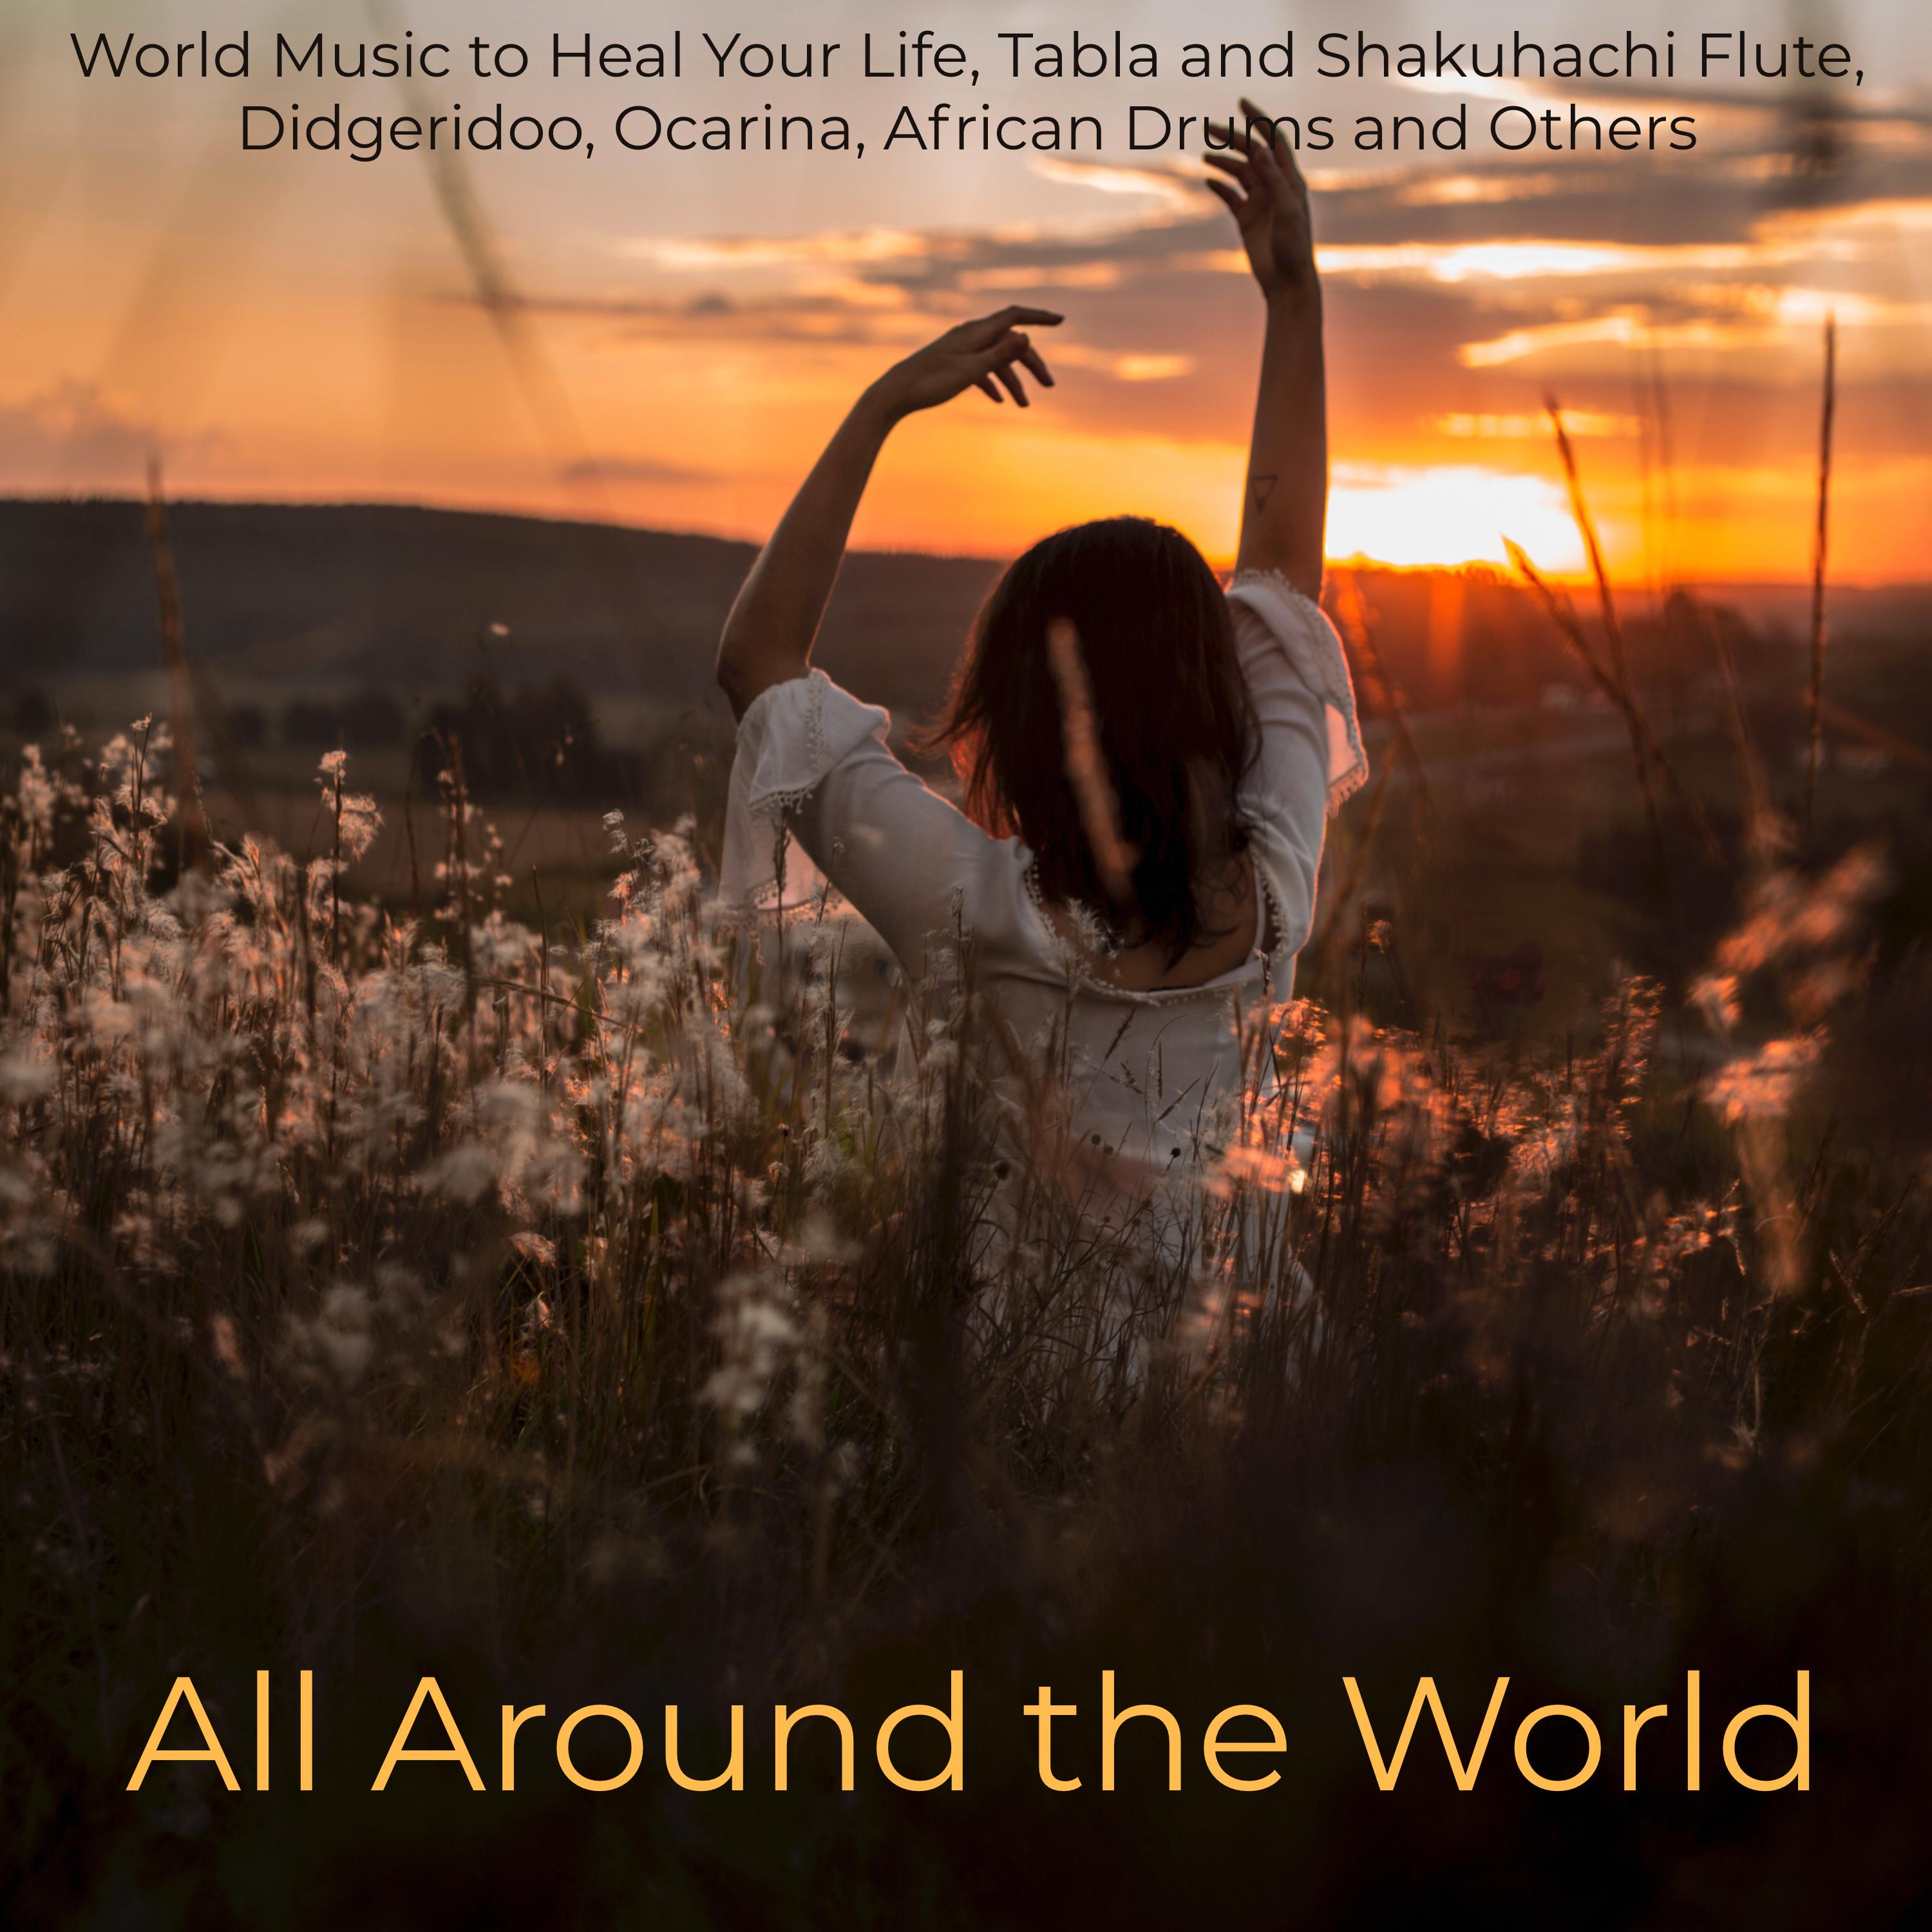 All Around the World – World Music to Heal Your Life, Tabla and Shakuhachi Flute, Didgeridoo, Ocarina, African Drums and Others